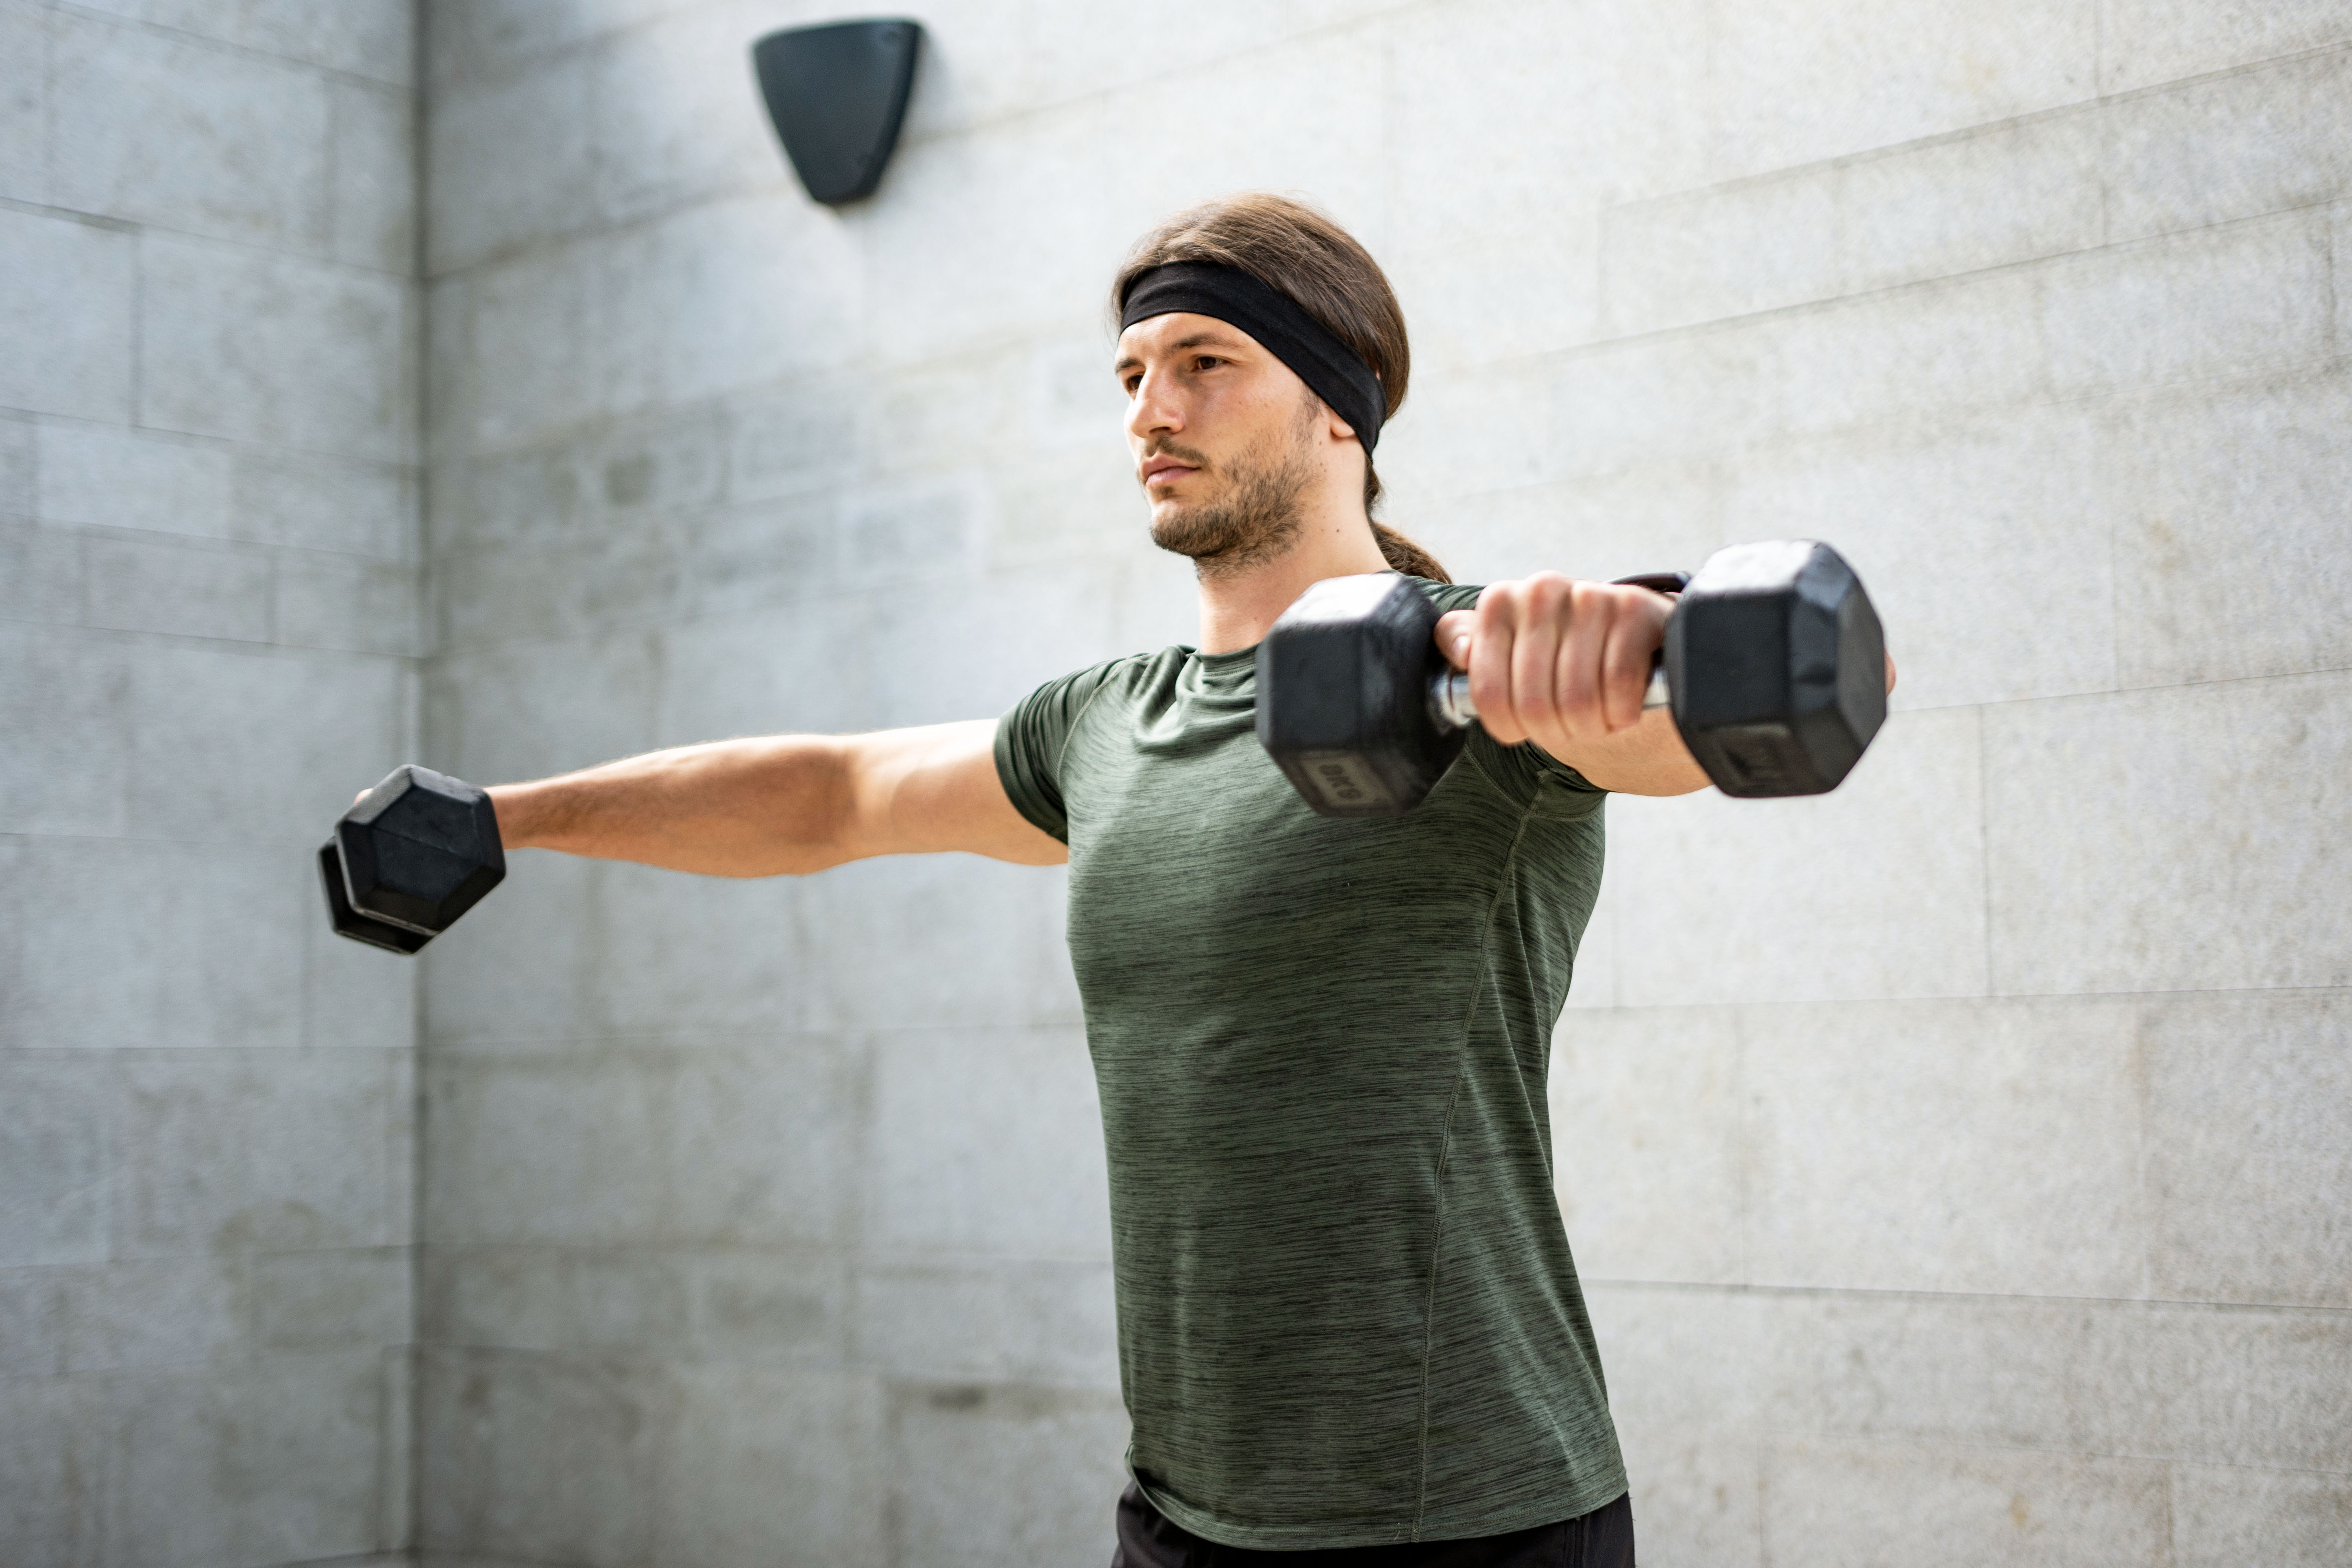 Concentrated man doing dumbbell workout. Well trained body with bulky  muscles. Sport equipment and weightlifting. Stock Photo